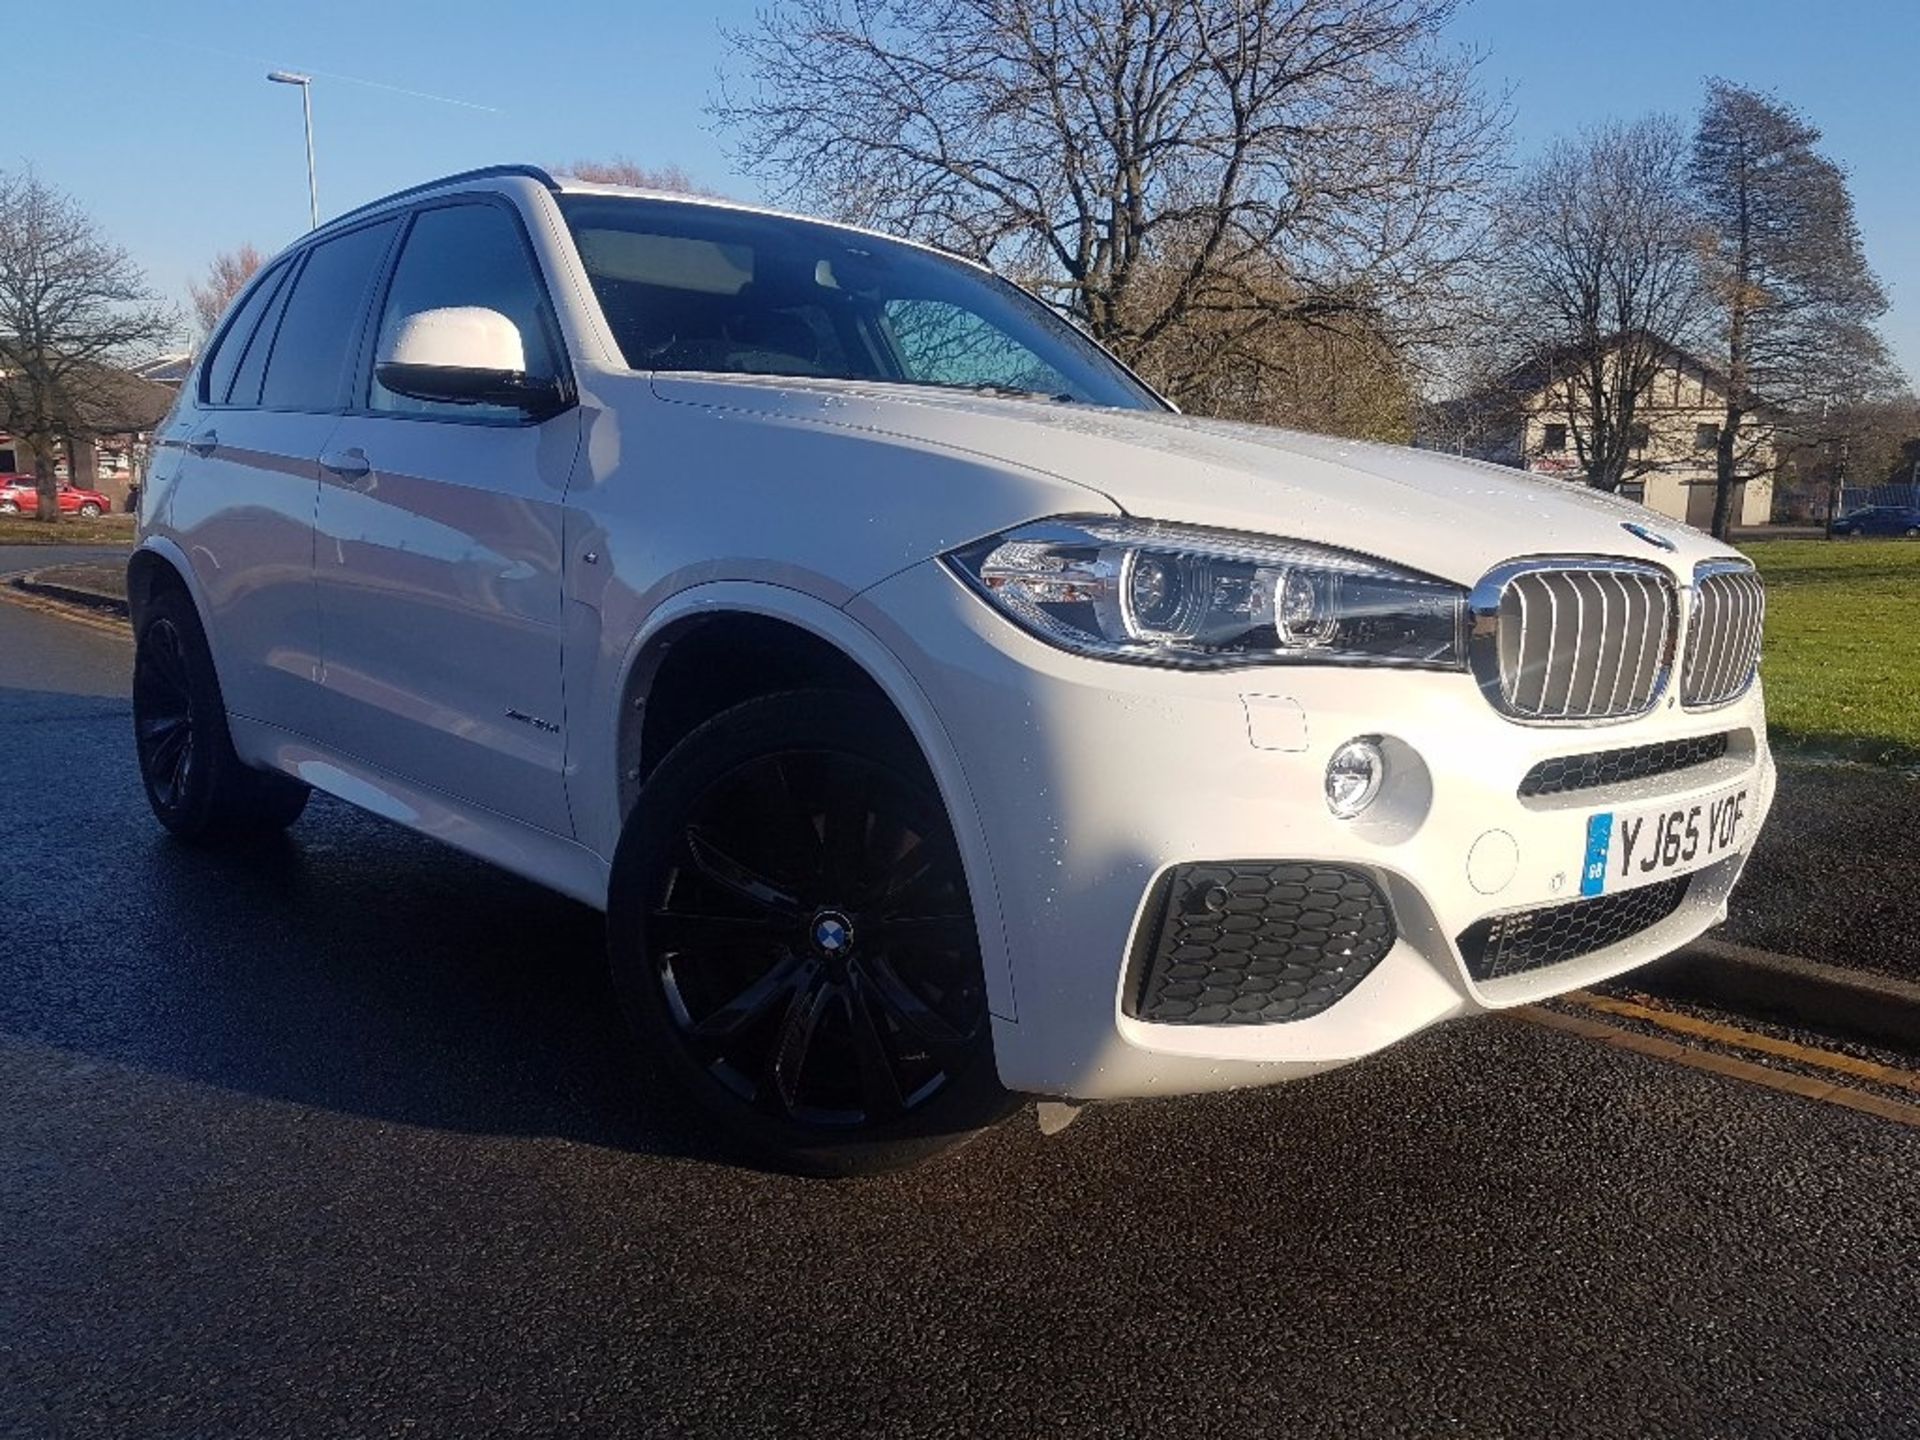 BMW, X5 40D M SPORT STEPTRONIC, 29.09.2015, YJ65 YOF, 3-0 LTR, DIESEL, AUTOMATIC, 5 DOOR SUV, 17,006 - Image 3 of 20